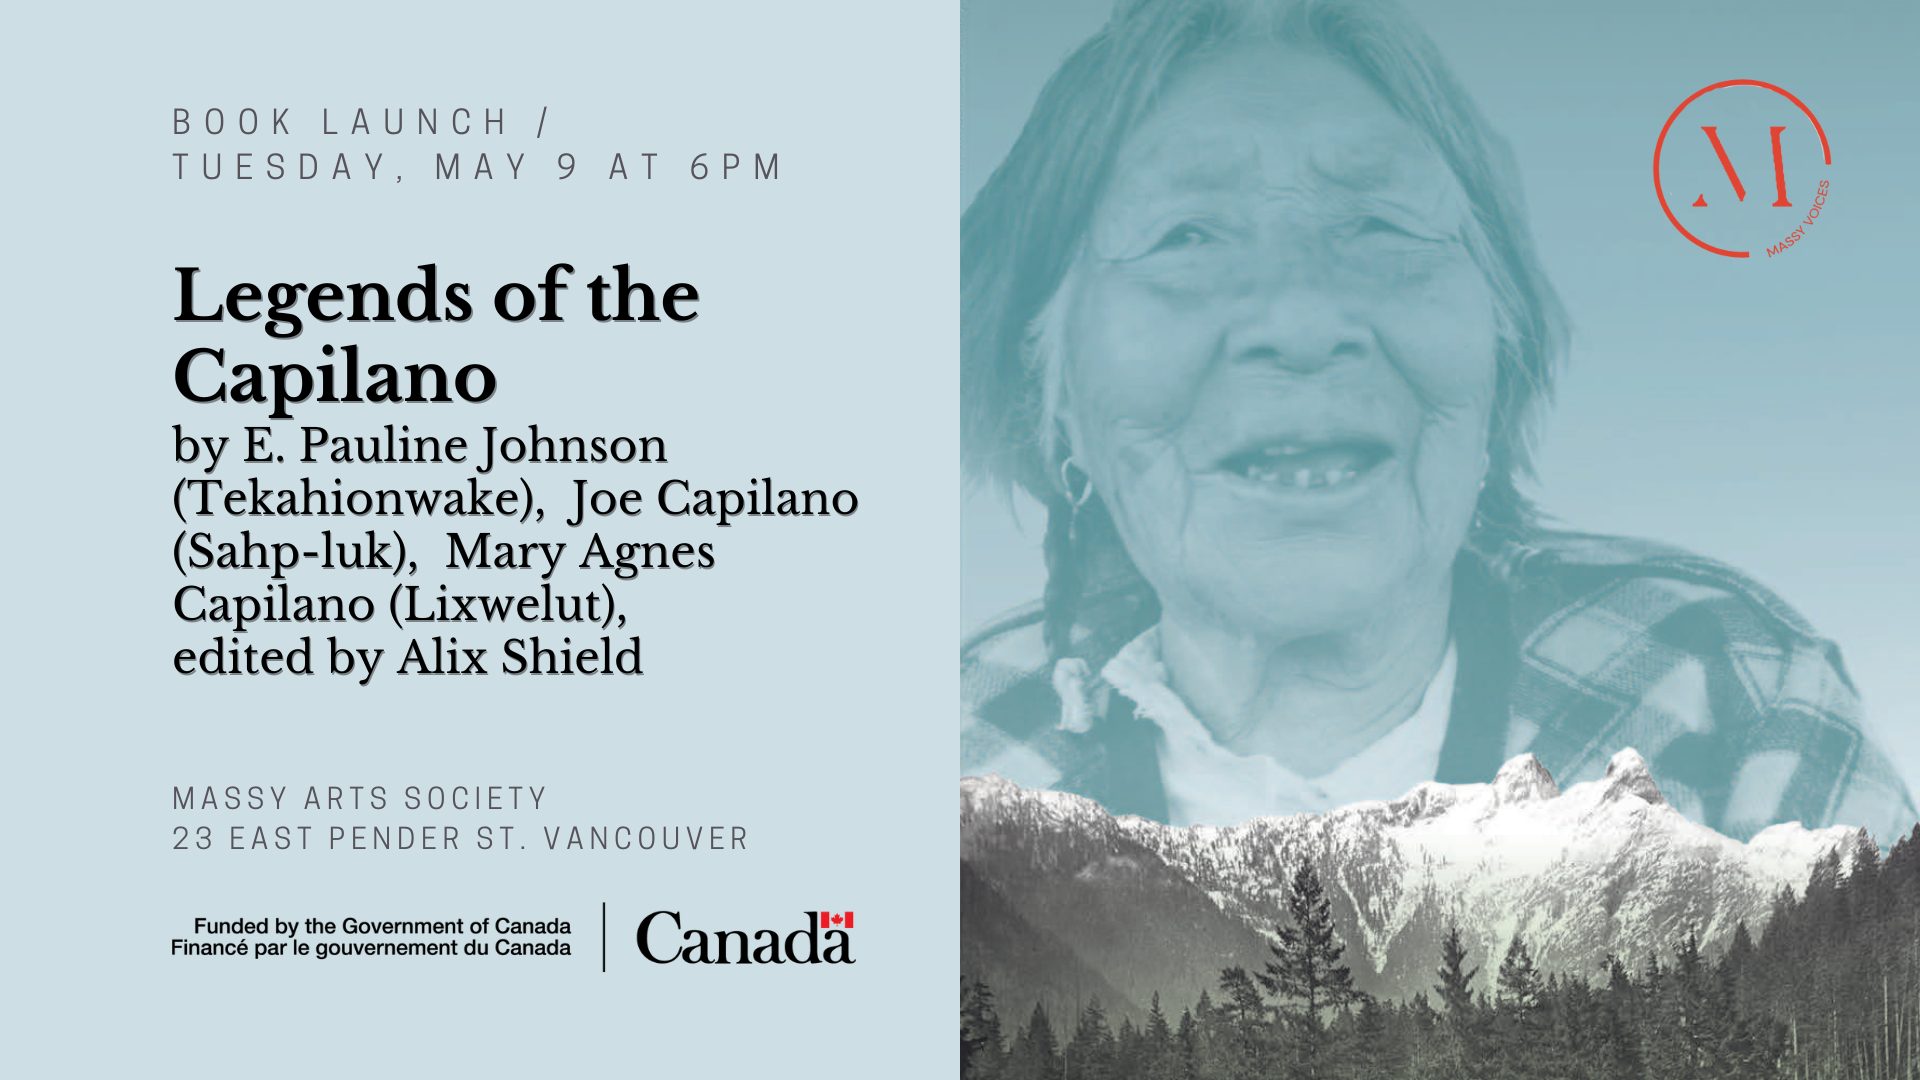 WATCH: Book Launch: Legends of the Capilano by E. Pauline Johnson, edited by Alix Shield